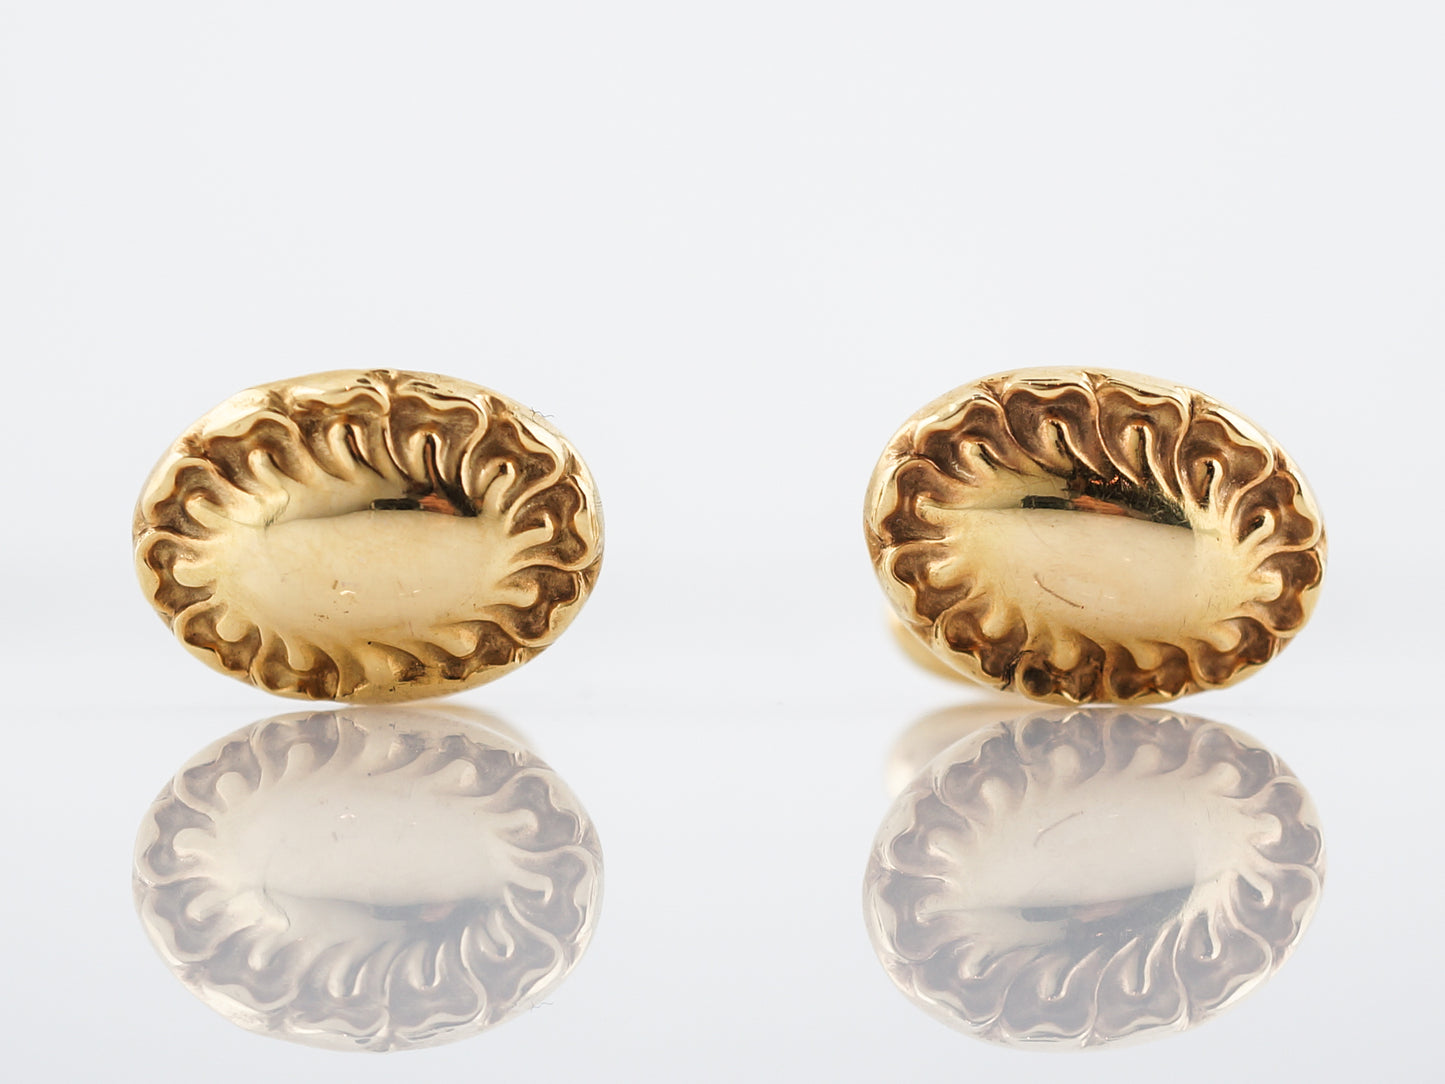 Antique Oval Cufflinks Victorian in 14K Yellow Gold